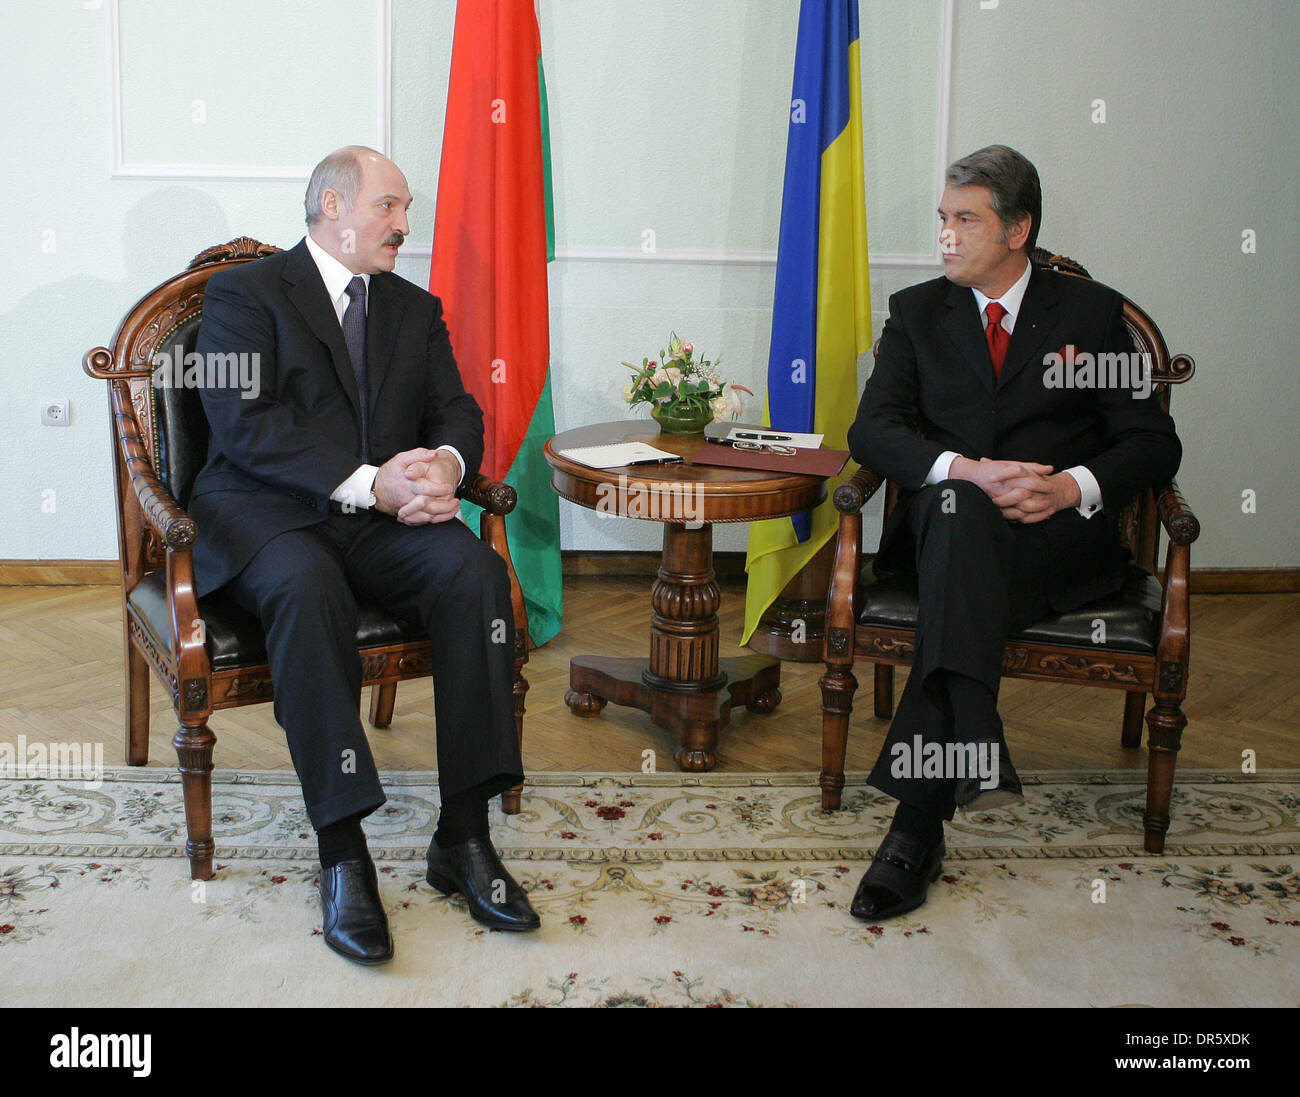 Jan 20, 2009 - Kiev, Ukraine - President of Belarus ALEXANDER LUKASHENKO, left, visits Ukraine and meets with President of Ukraine VIKTOR YUSHCHENKO, right. (Credit Image: © PhotoXpress/ZUMA Press) RESTRICTIONS: * North and South America Rights Only * Stock Photo